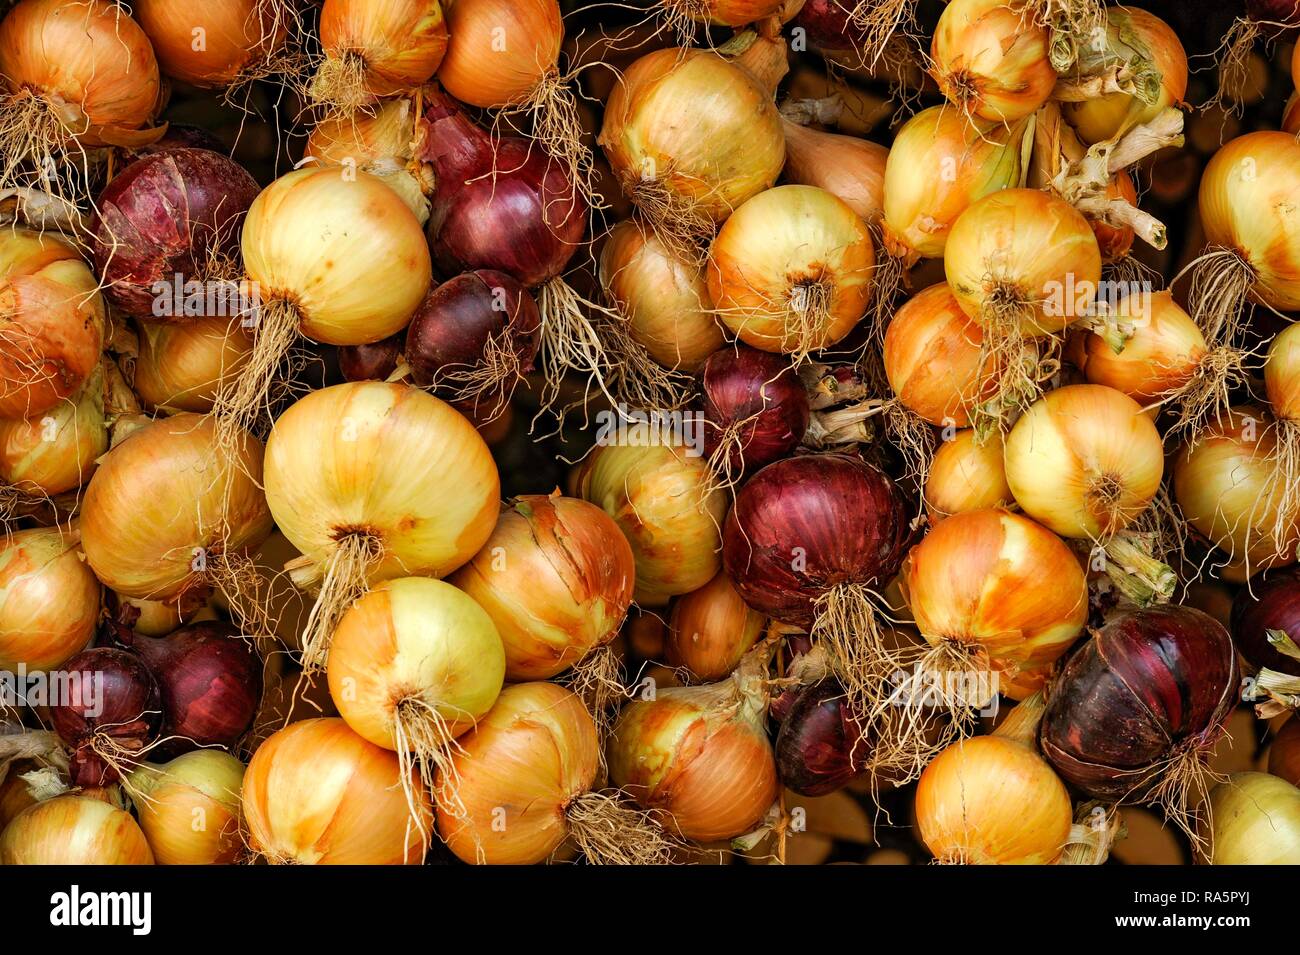 Red and white onions, Greding, Middle Franconia, Franconia, Bavaria, Germany Stock Photo